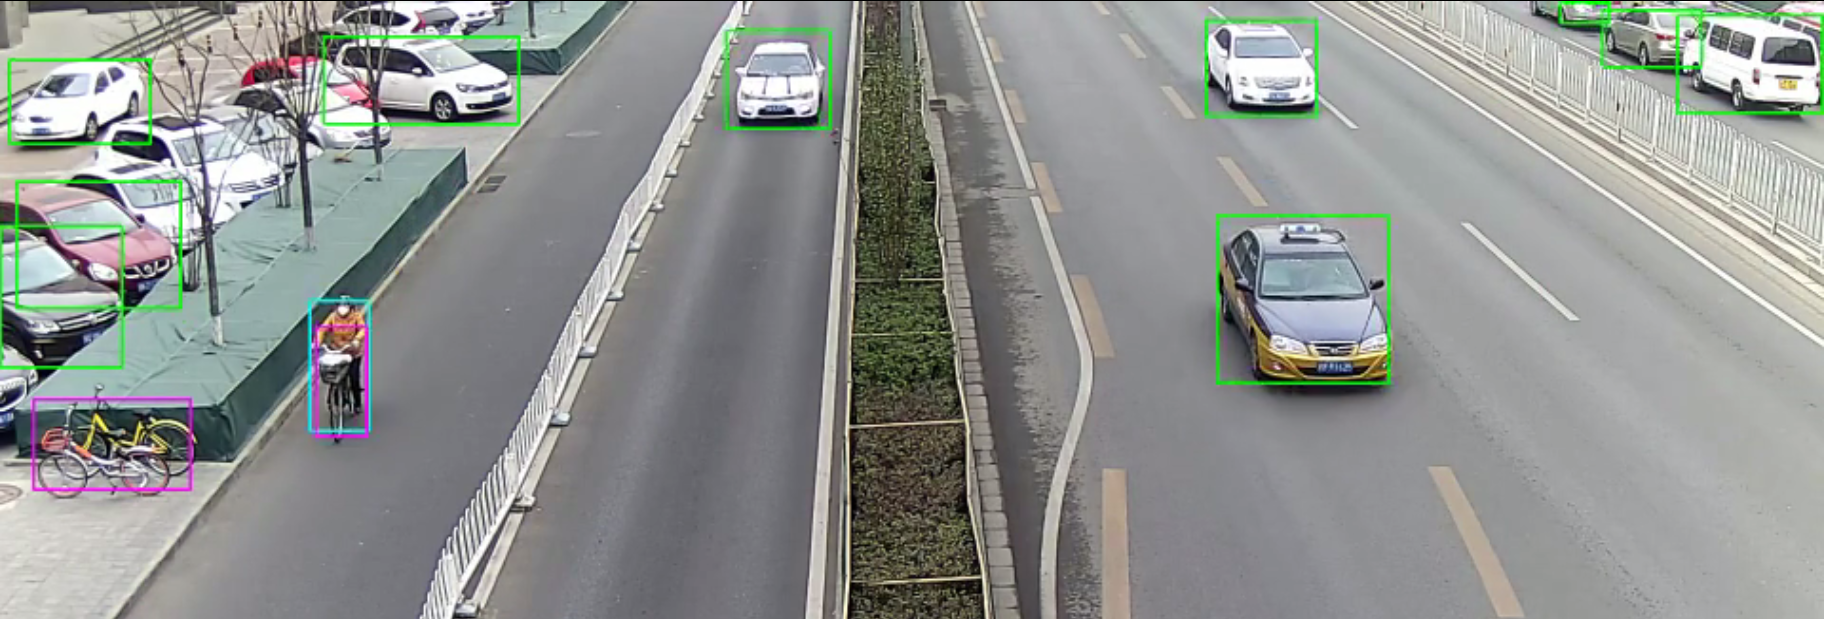 _images/person-vehicle-bike-detection-crossroad-0078.png